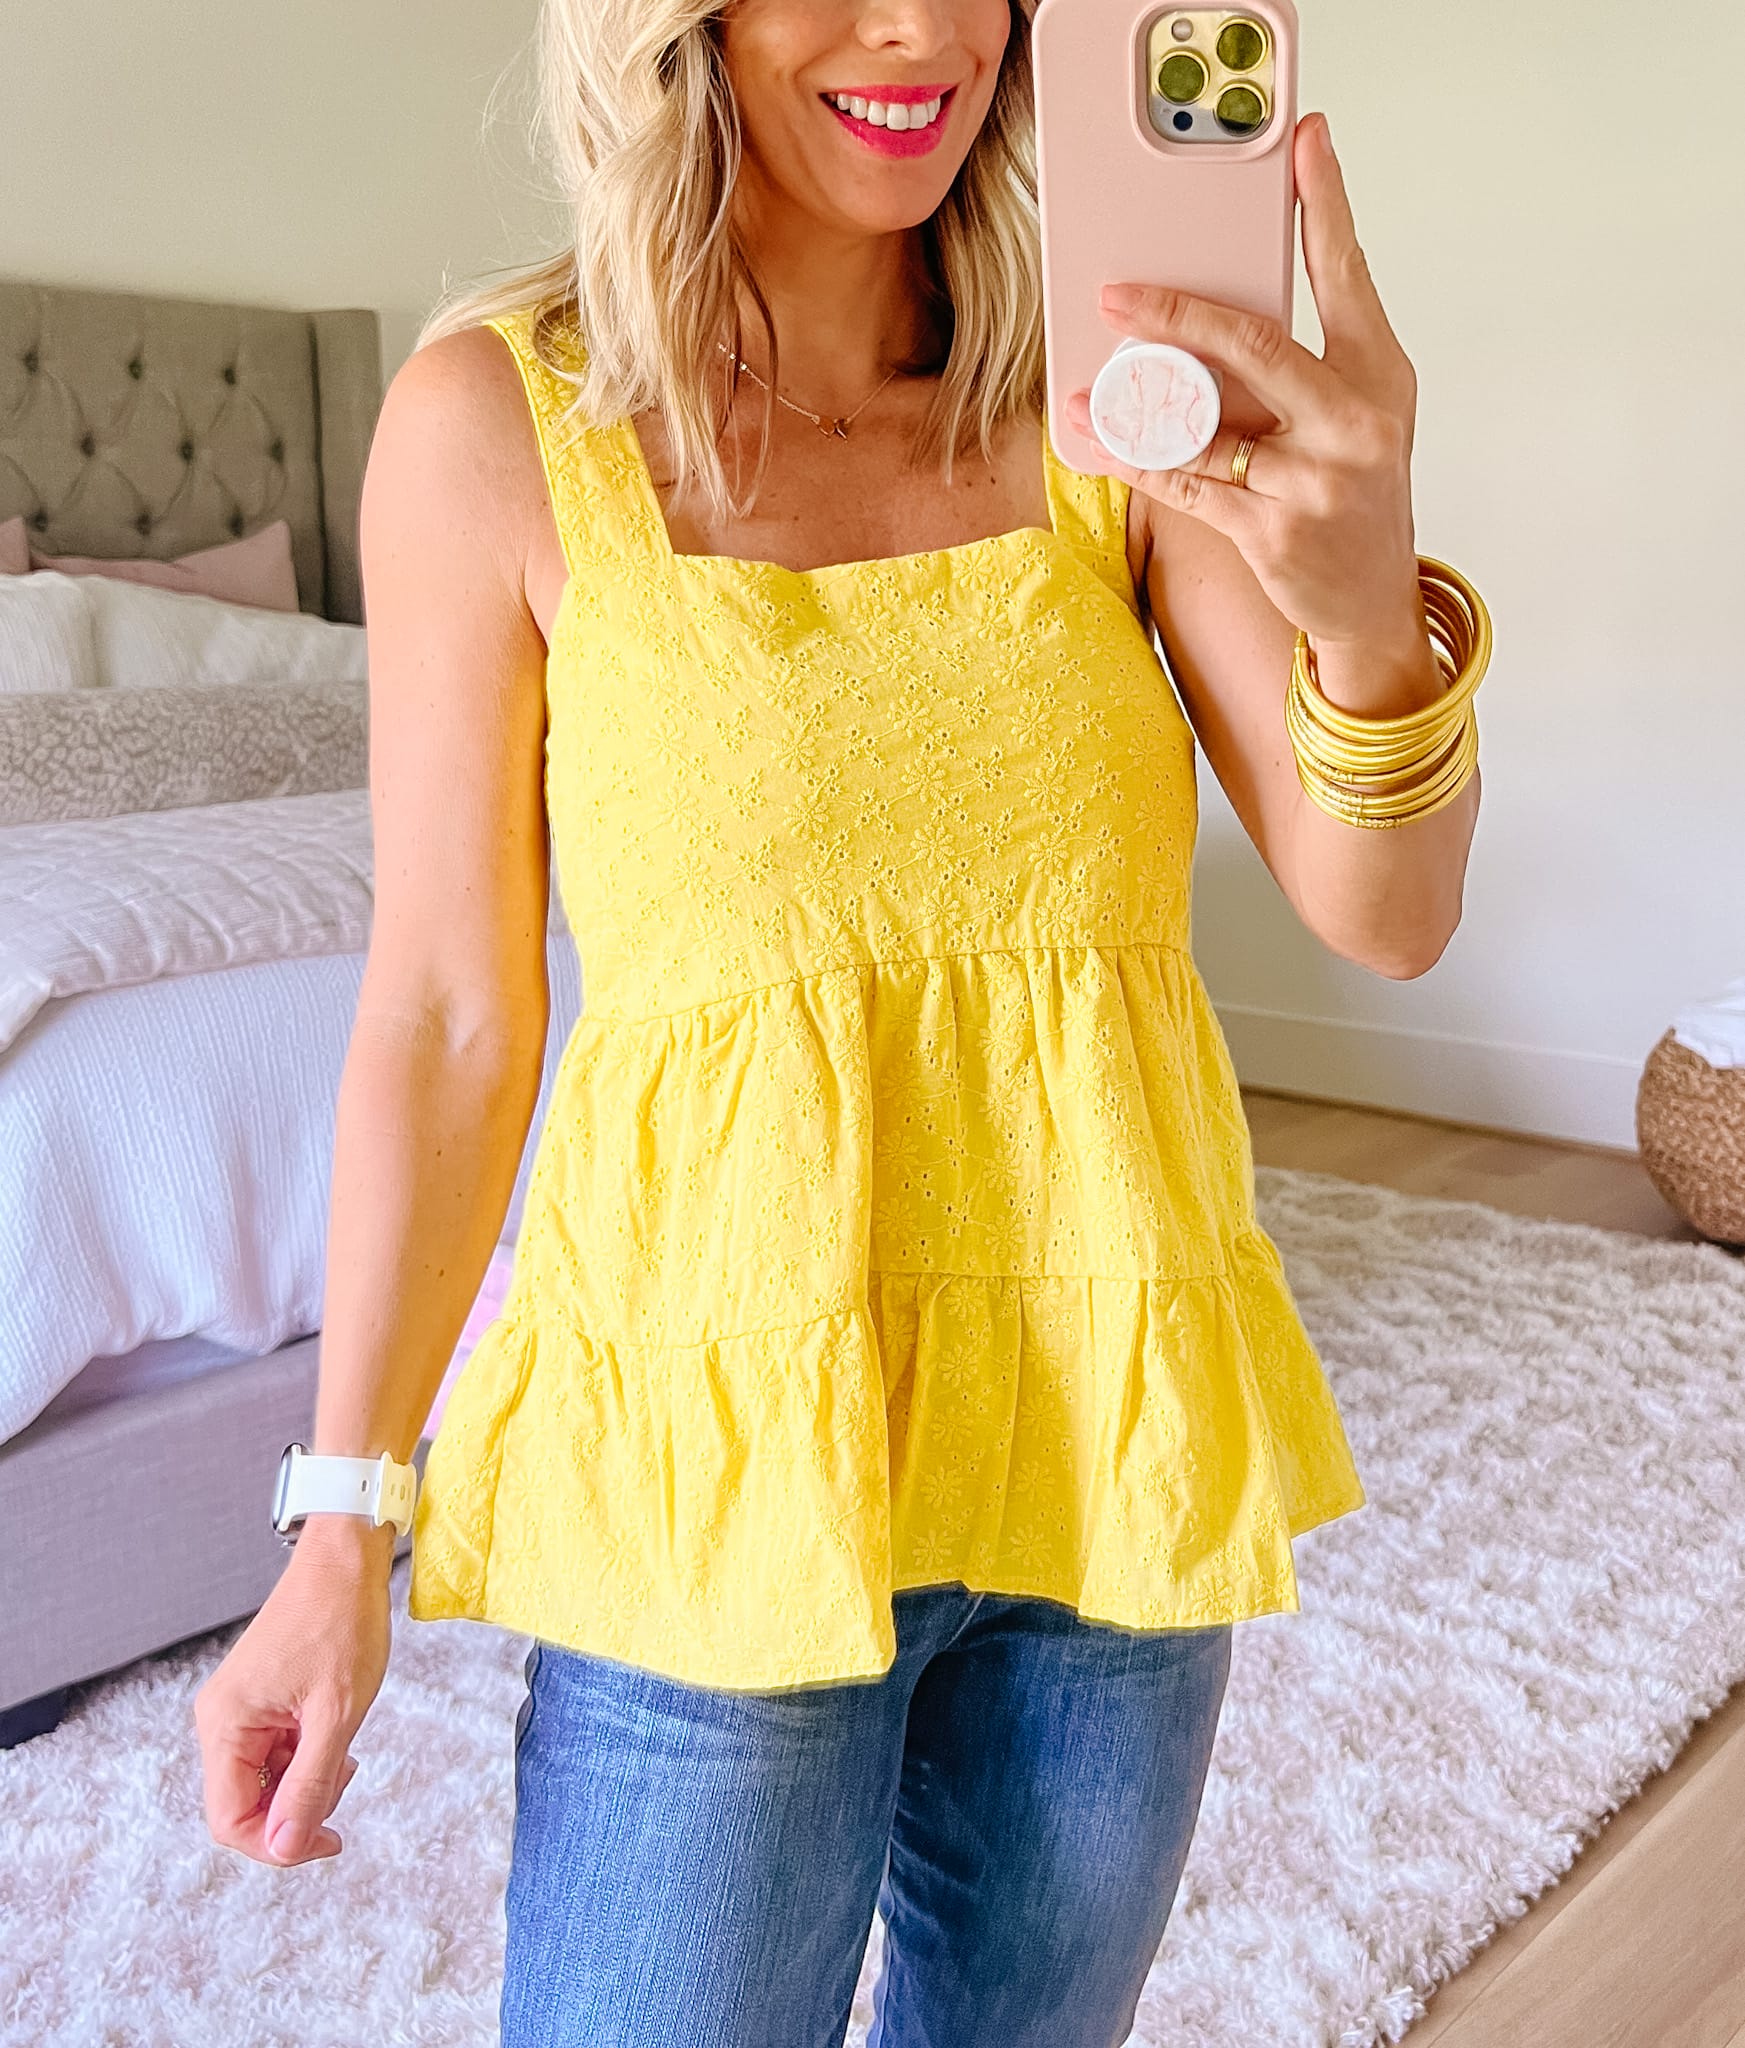 Bloomingdale's Yellow Tank Eyelet, Jeans, Wedges, Bamboo Clutch